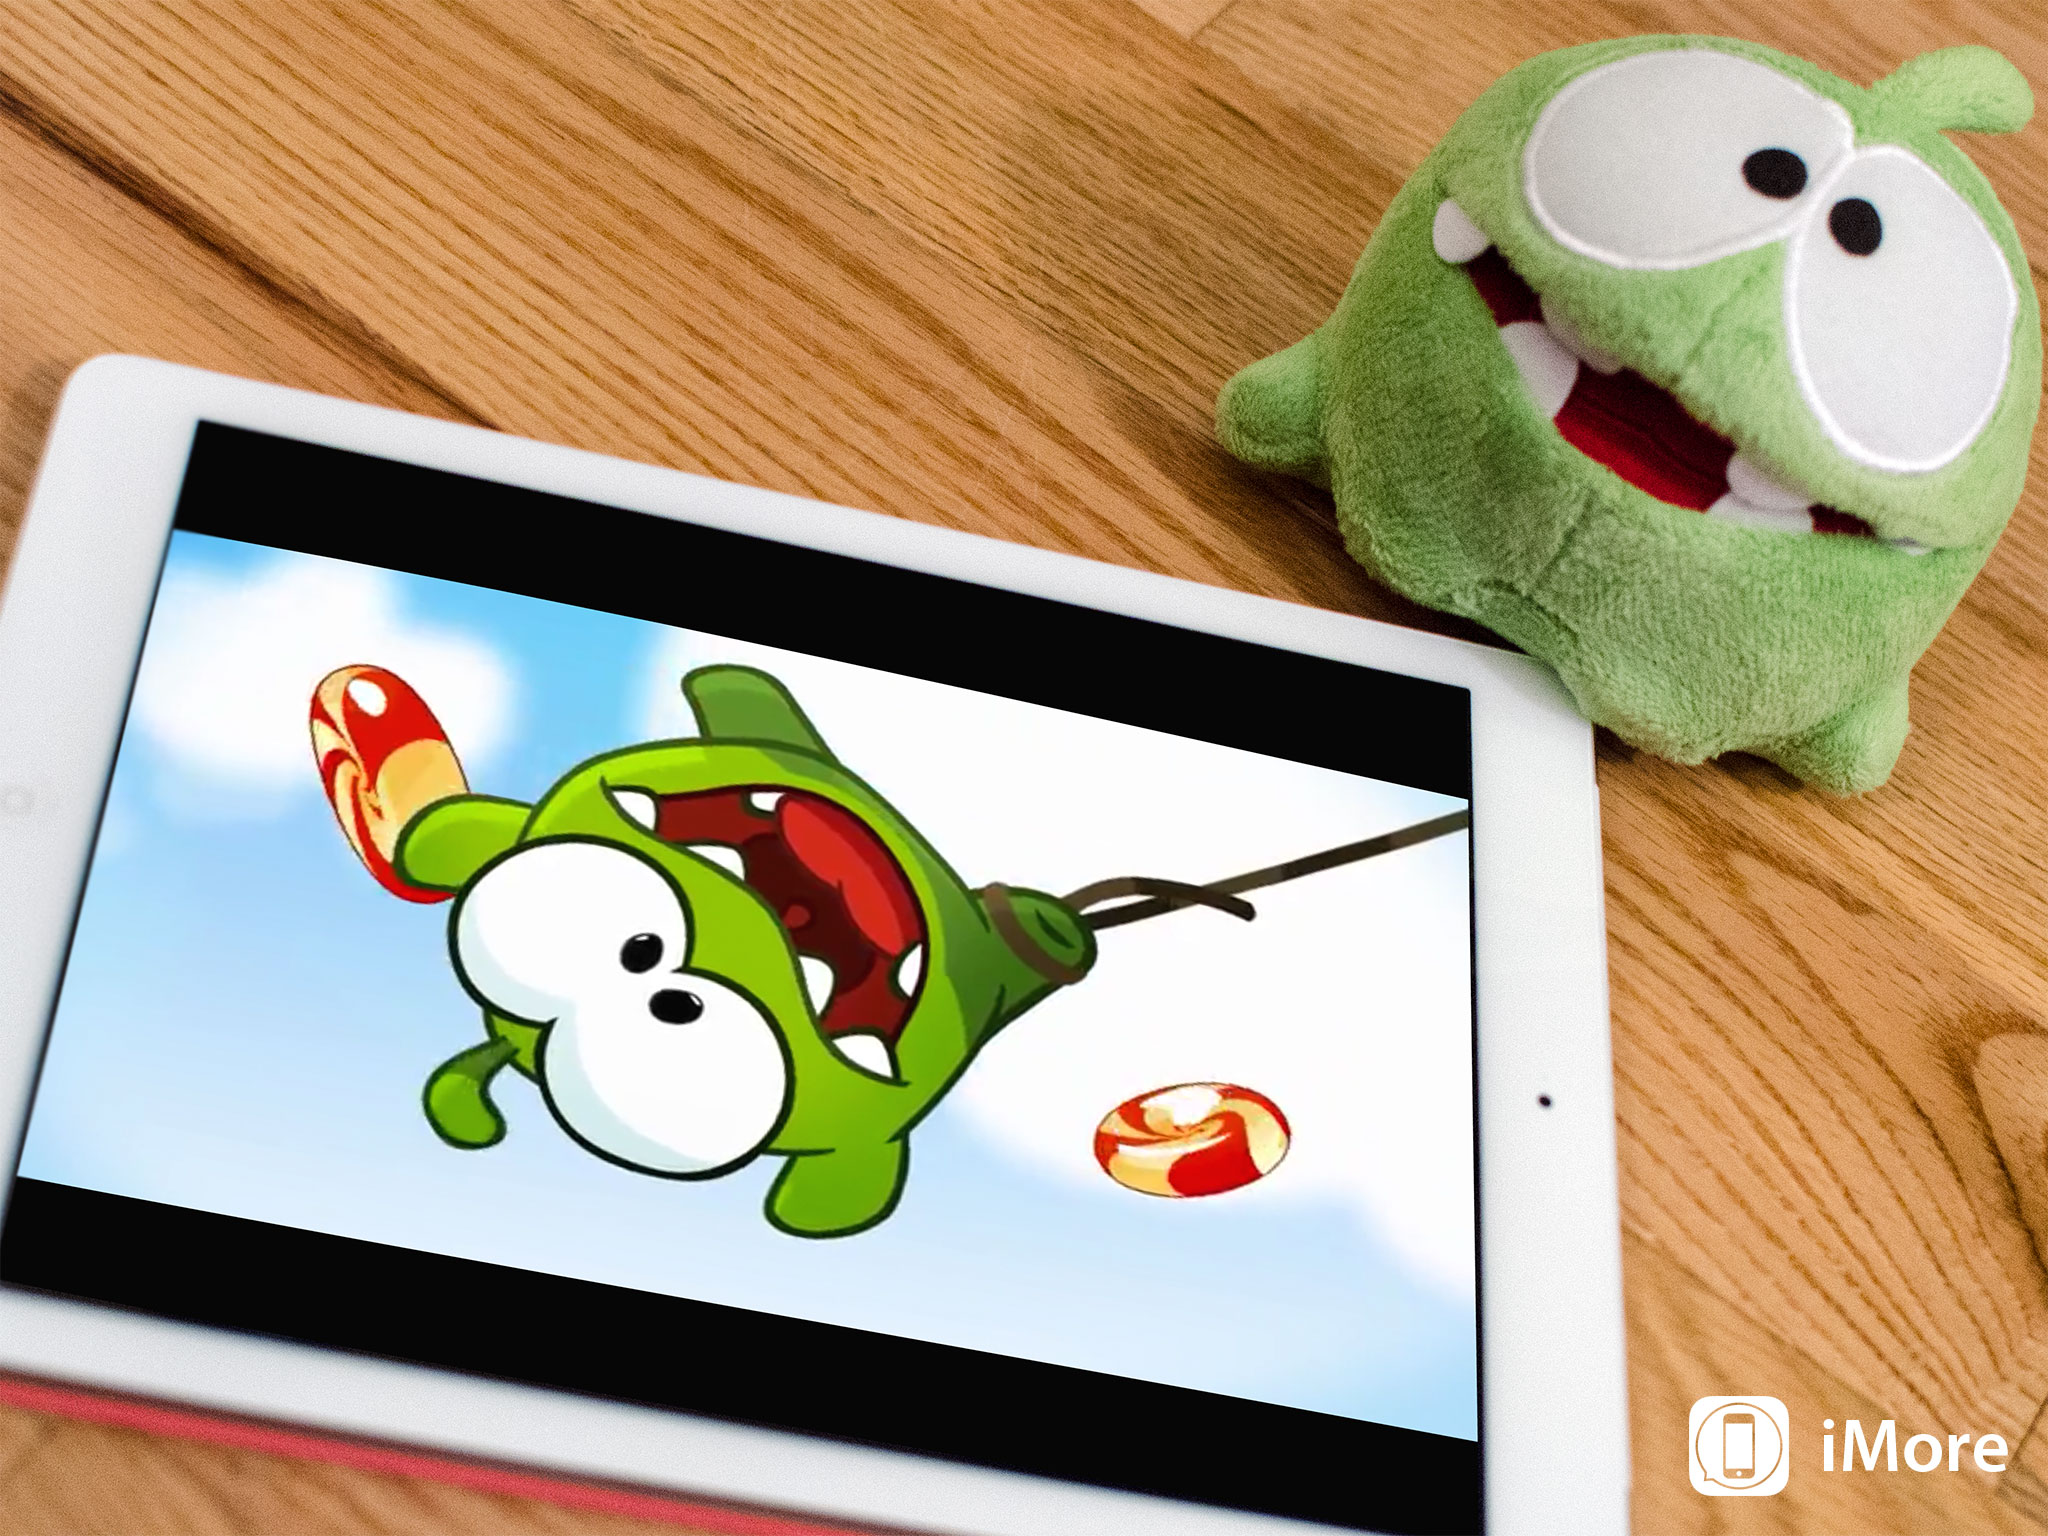 Cut the Rope 2: Top 10 tips, tricks, and cheats to help Om Nom beat levels  and find his candy faster!